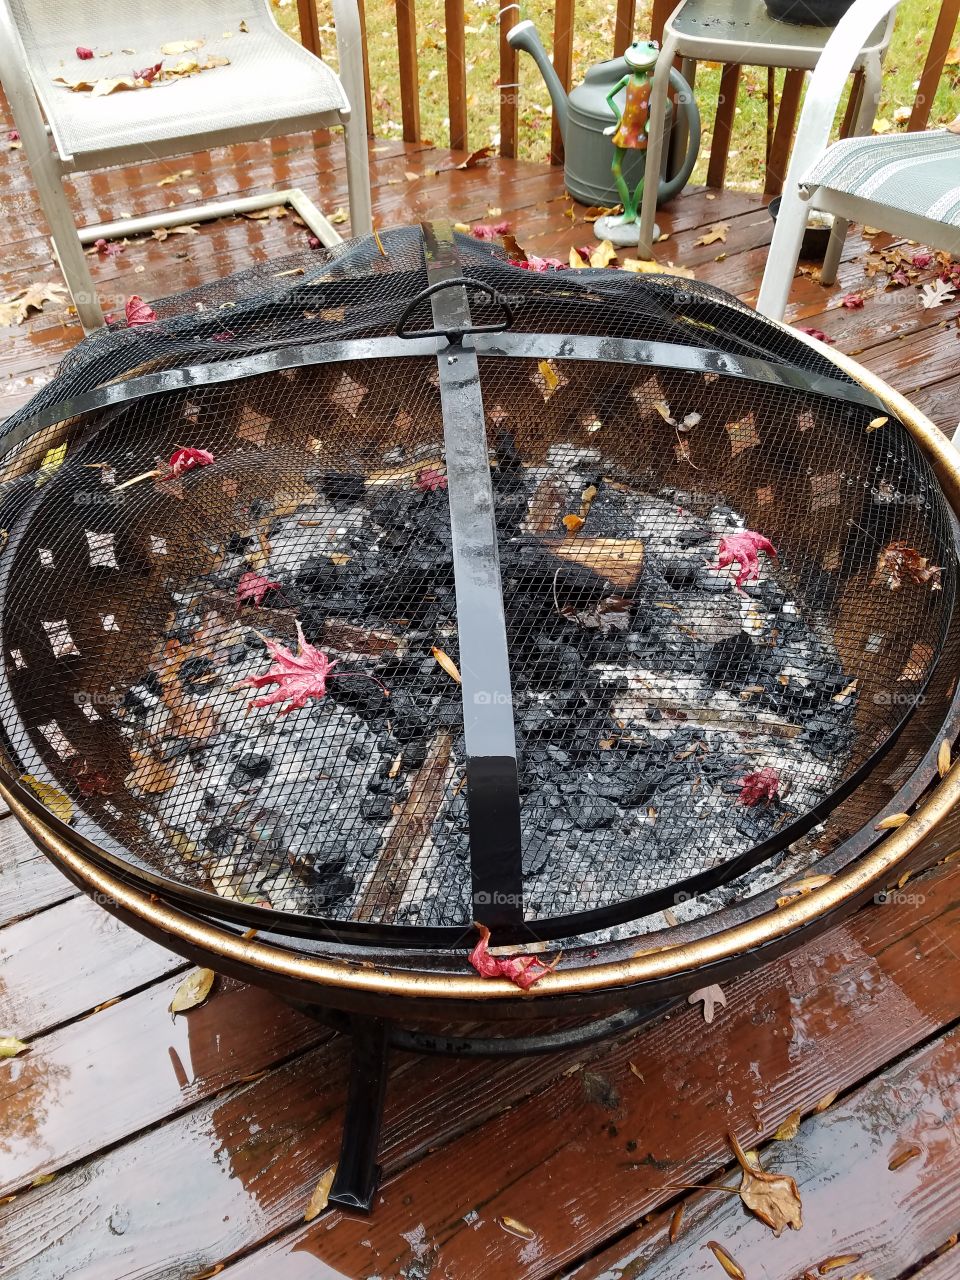 Rained on firepit in Autumn